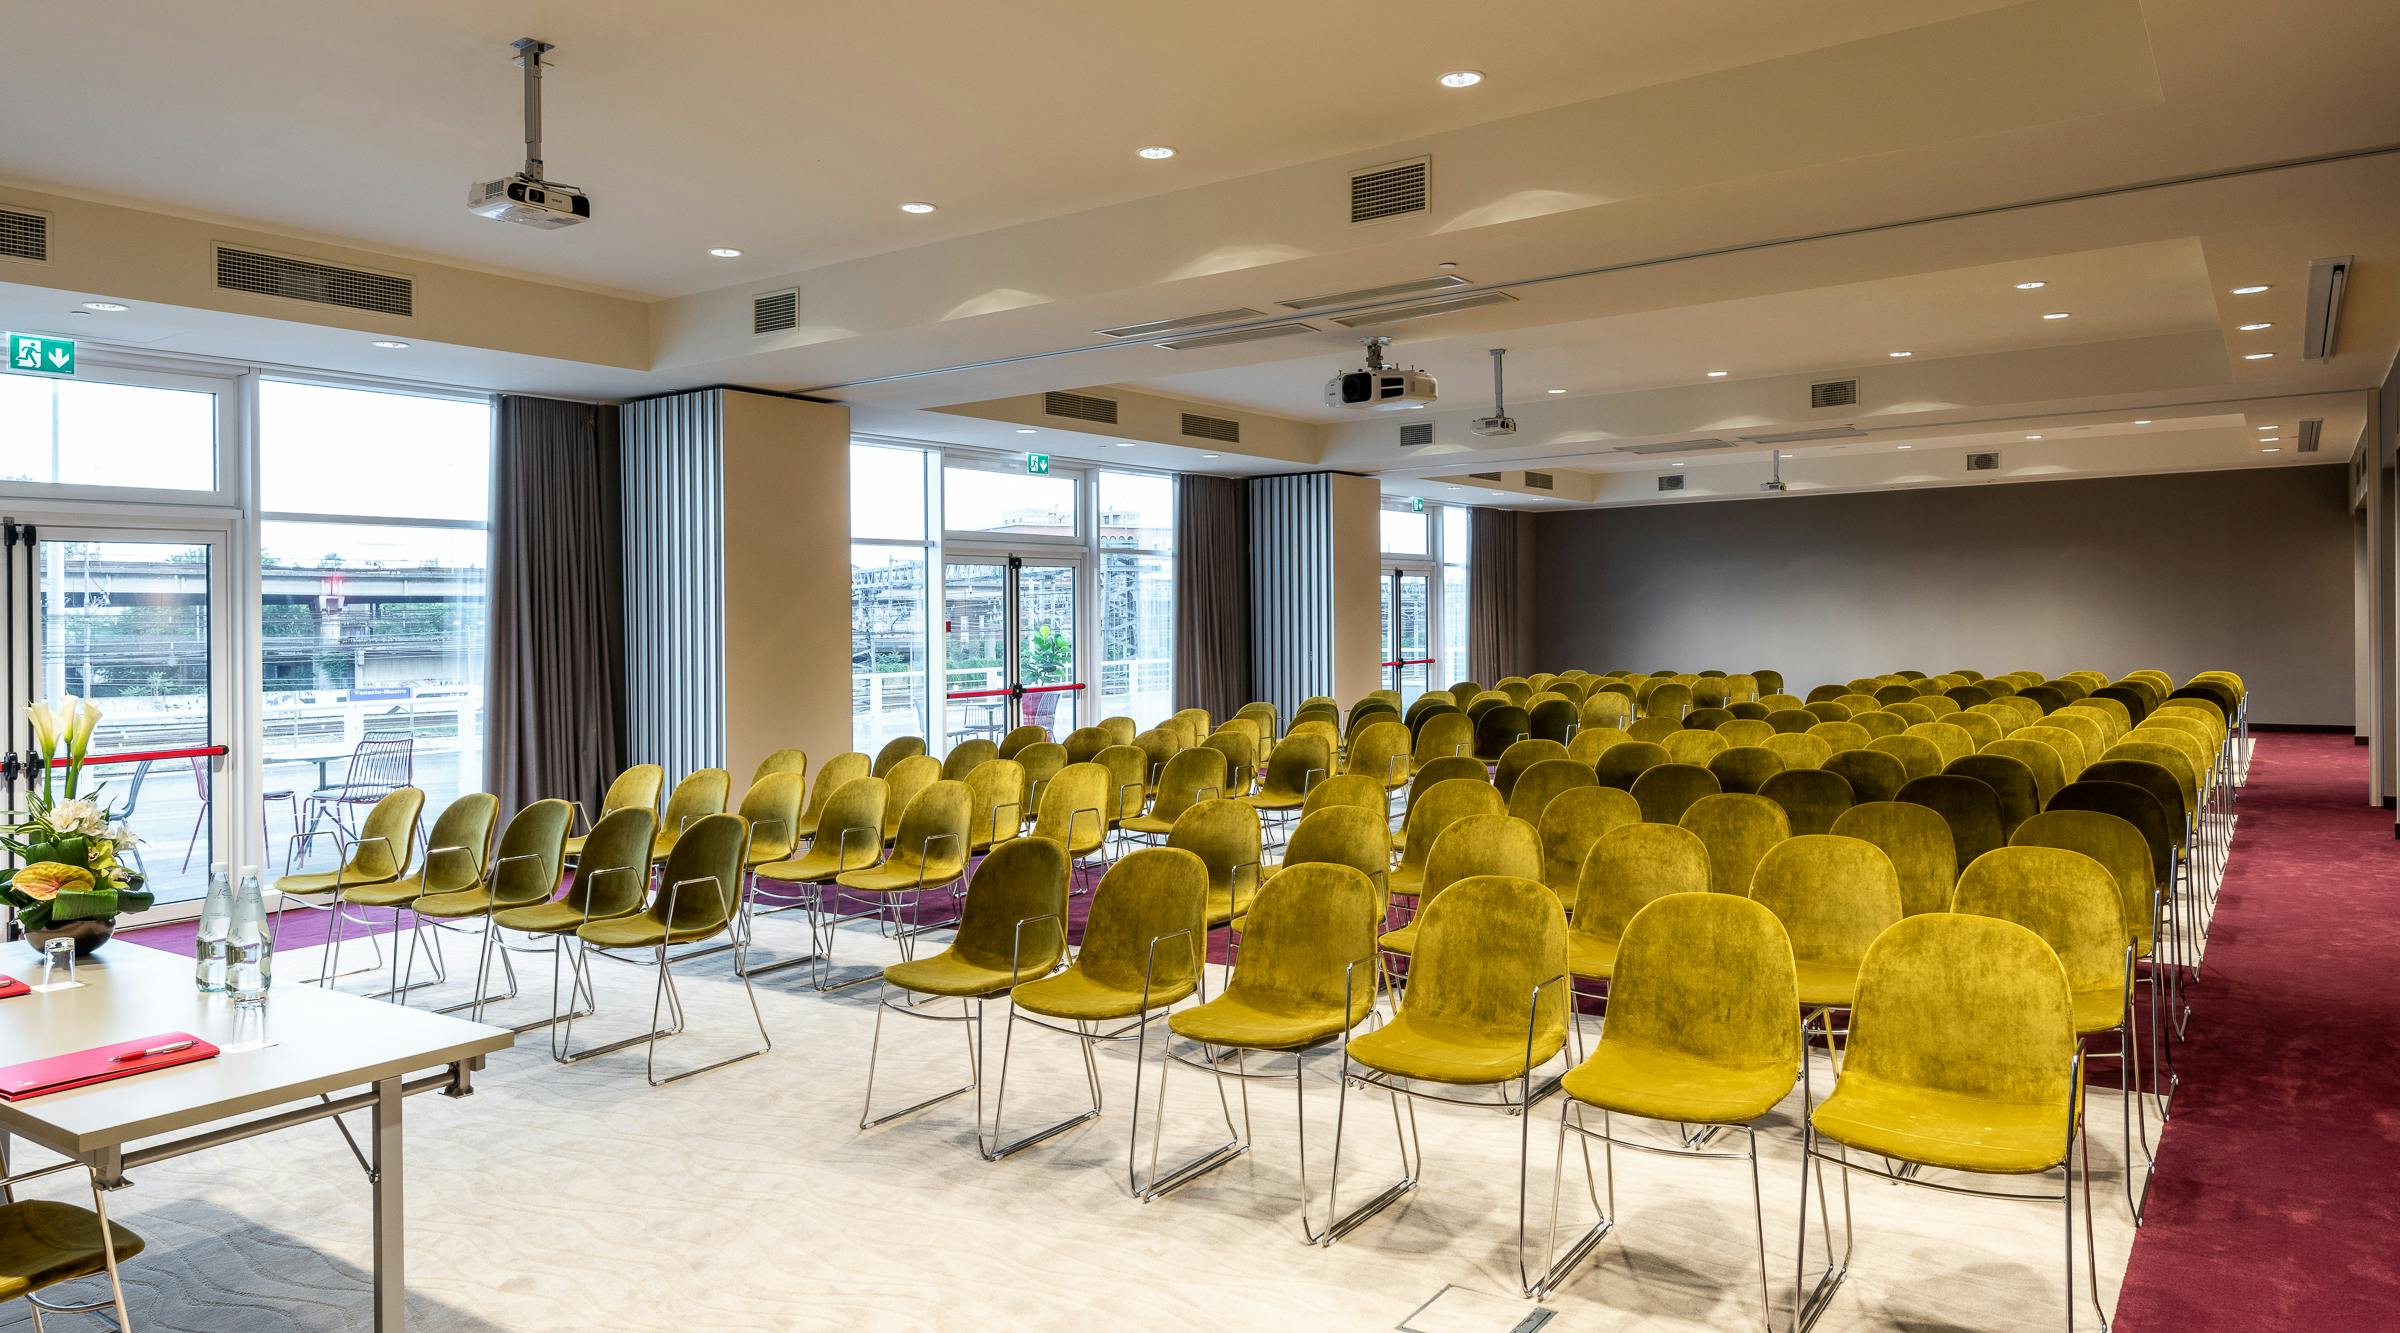 Meeting room with yellow chairs